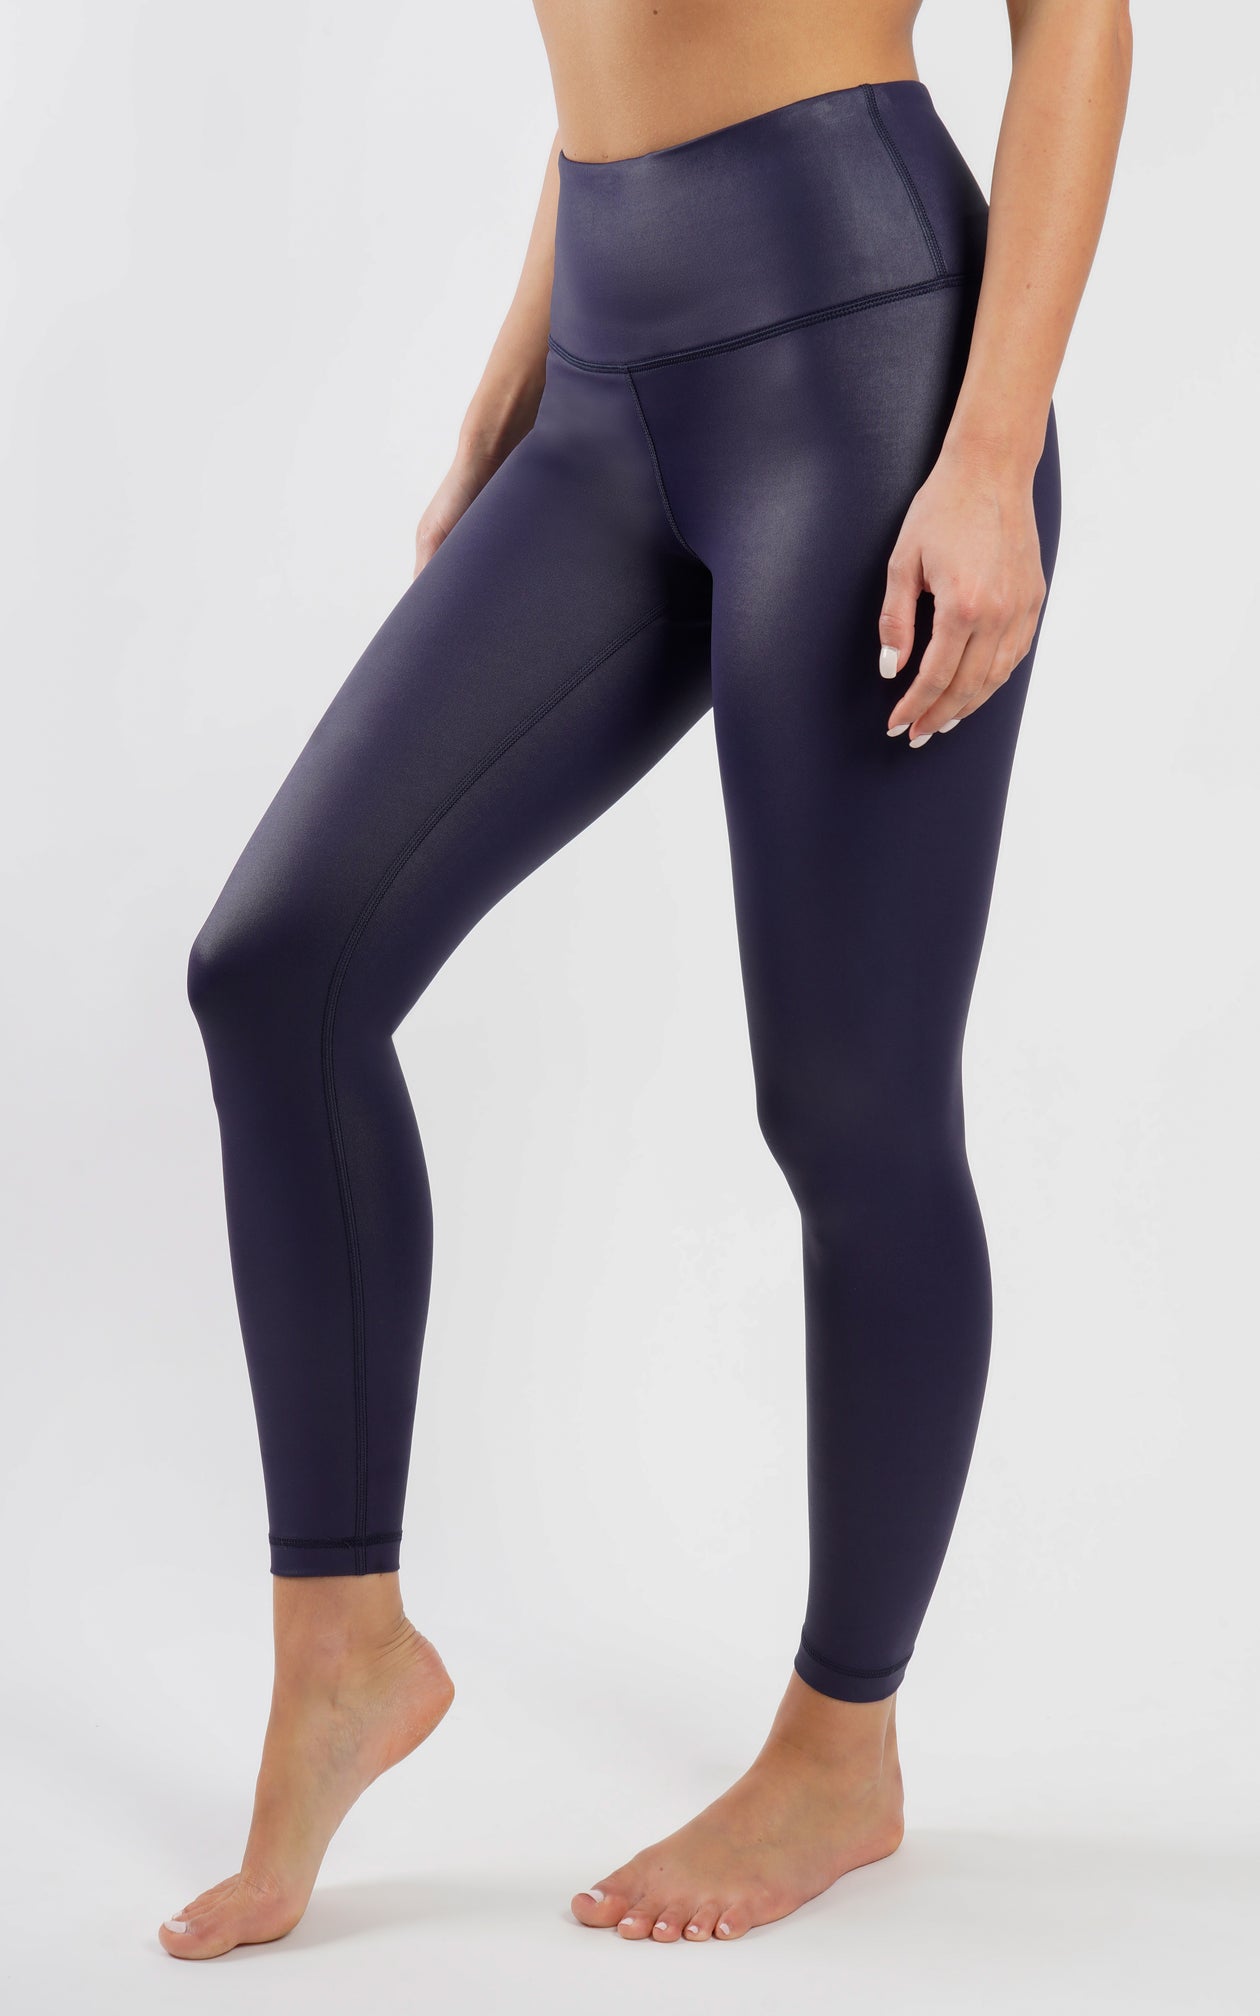 Zyia metallic blue legging outfit  Blue leggings outfit, Outfits